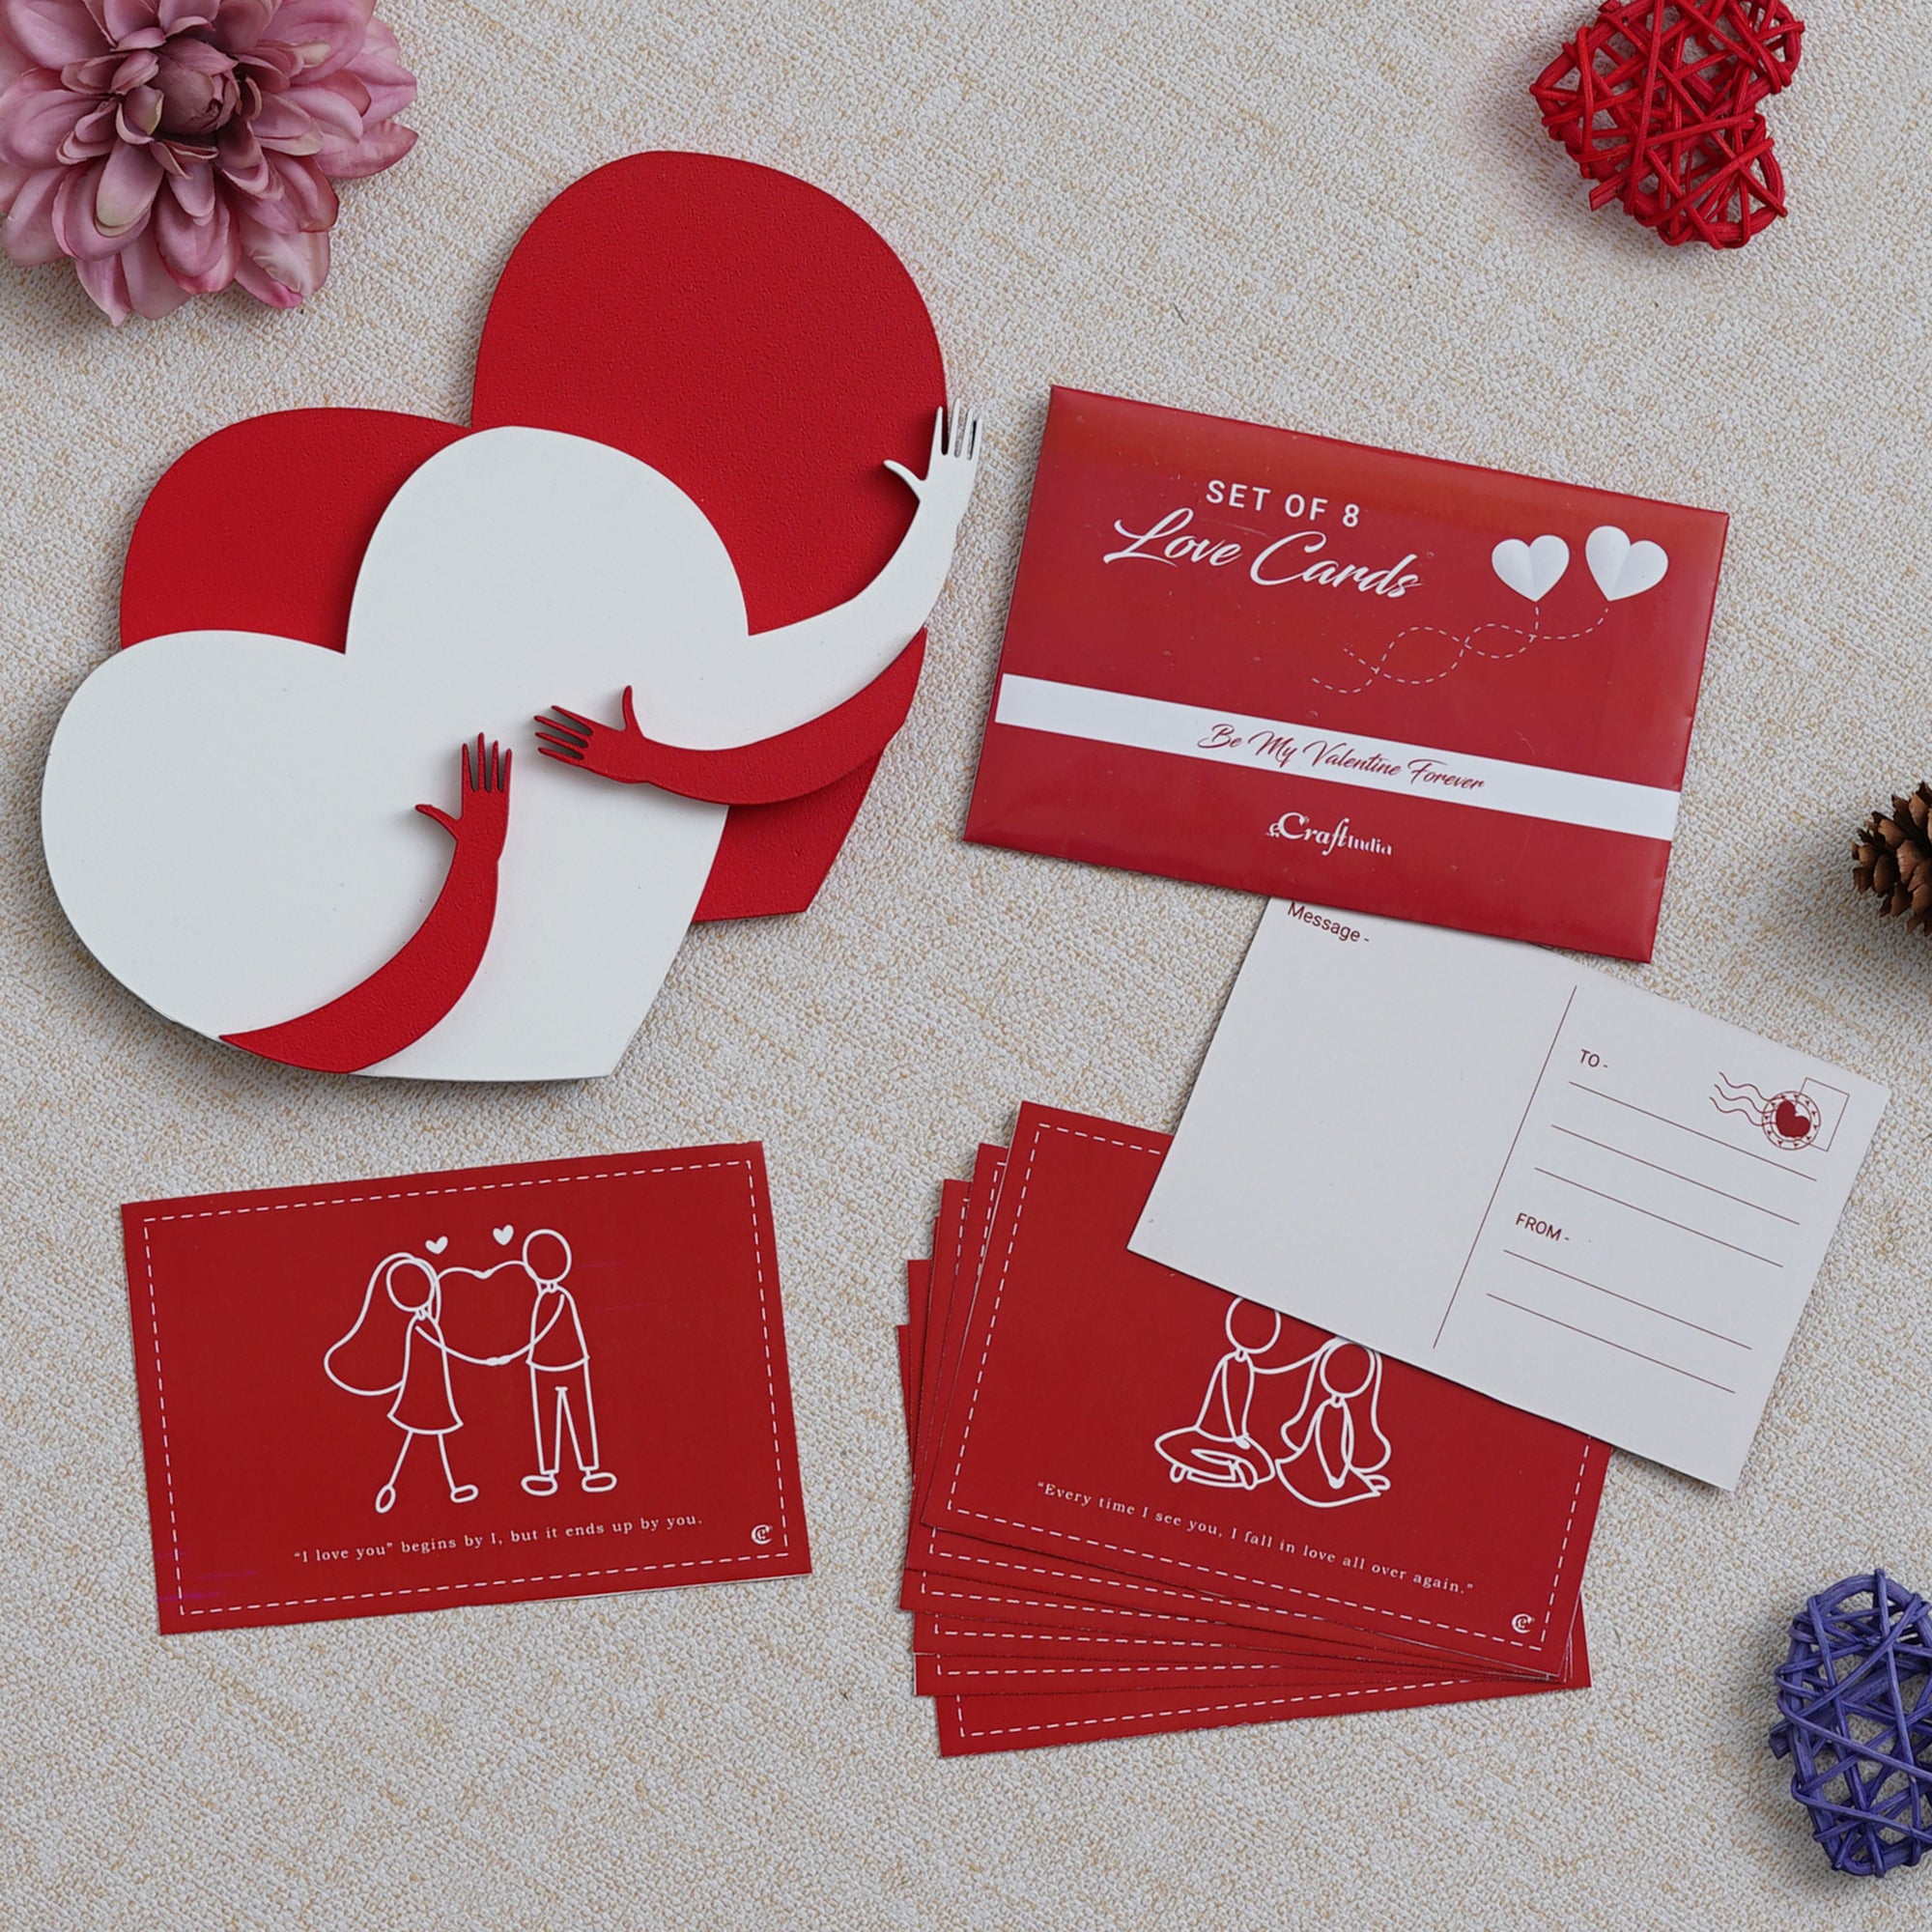 Valentine Combo of Set of 8 Love Post Cards Gift Cards Set, Red and White Heart Hugging Each Other Gift Set